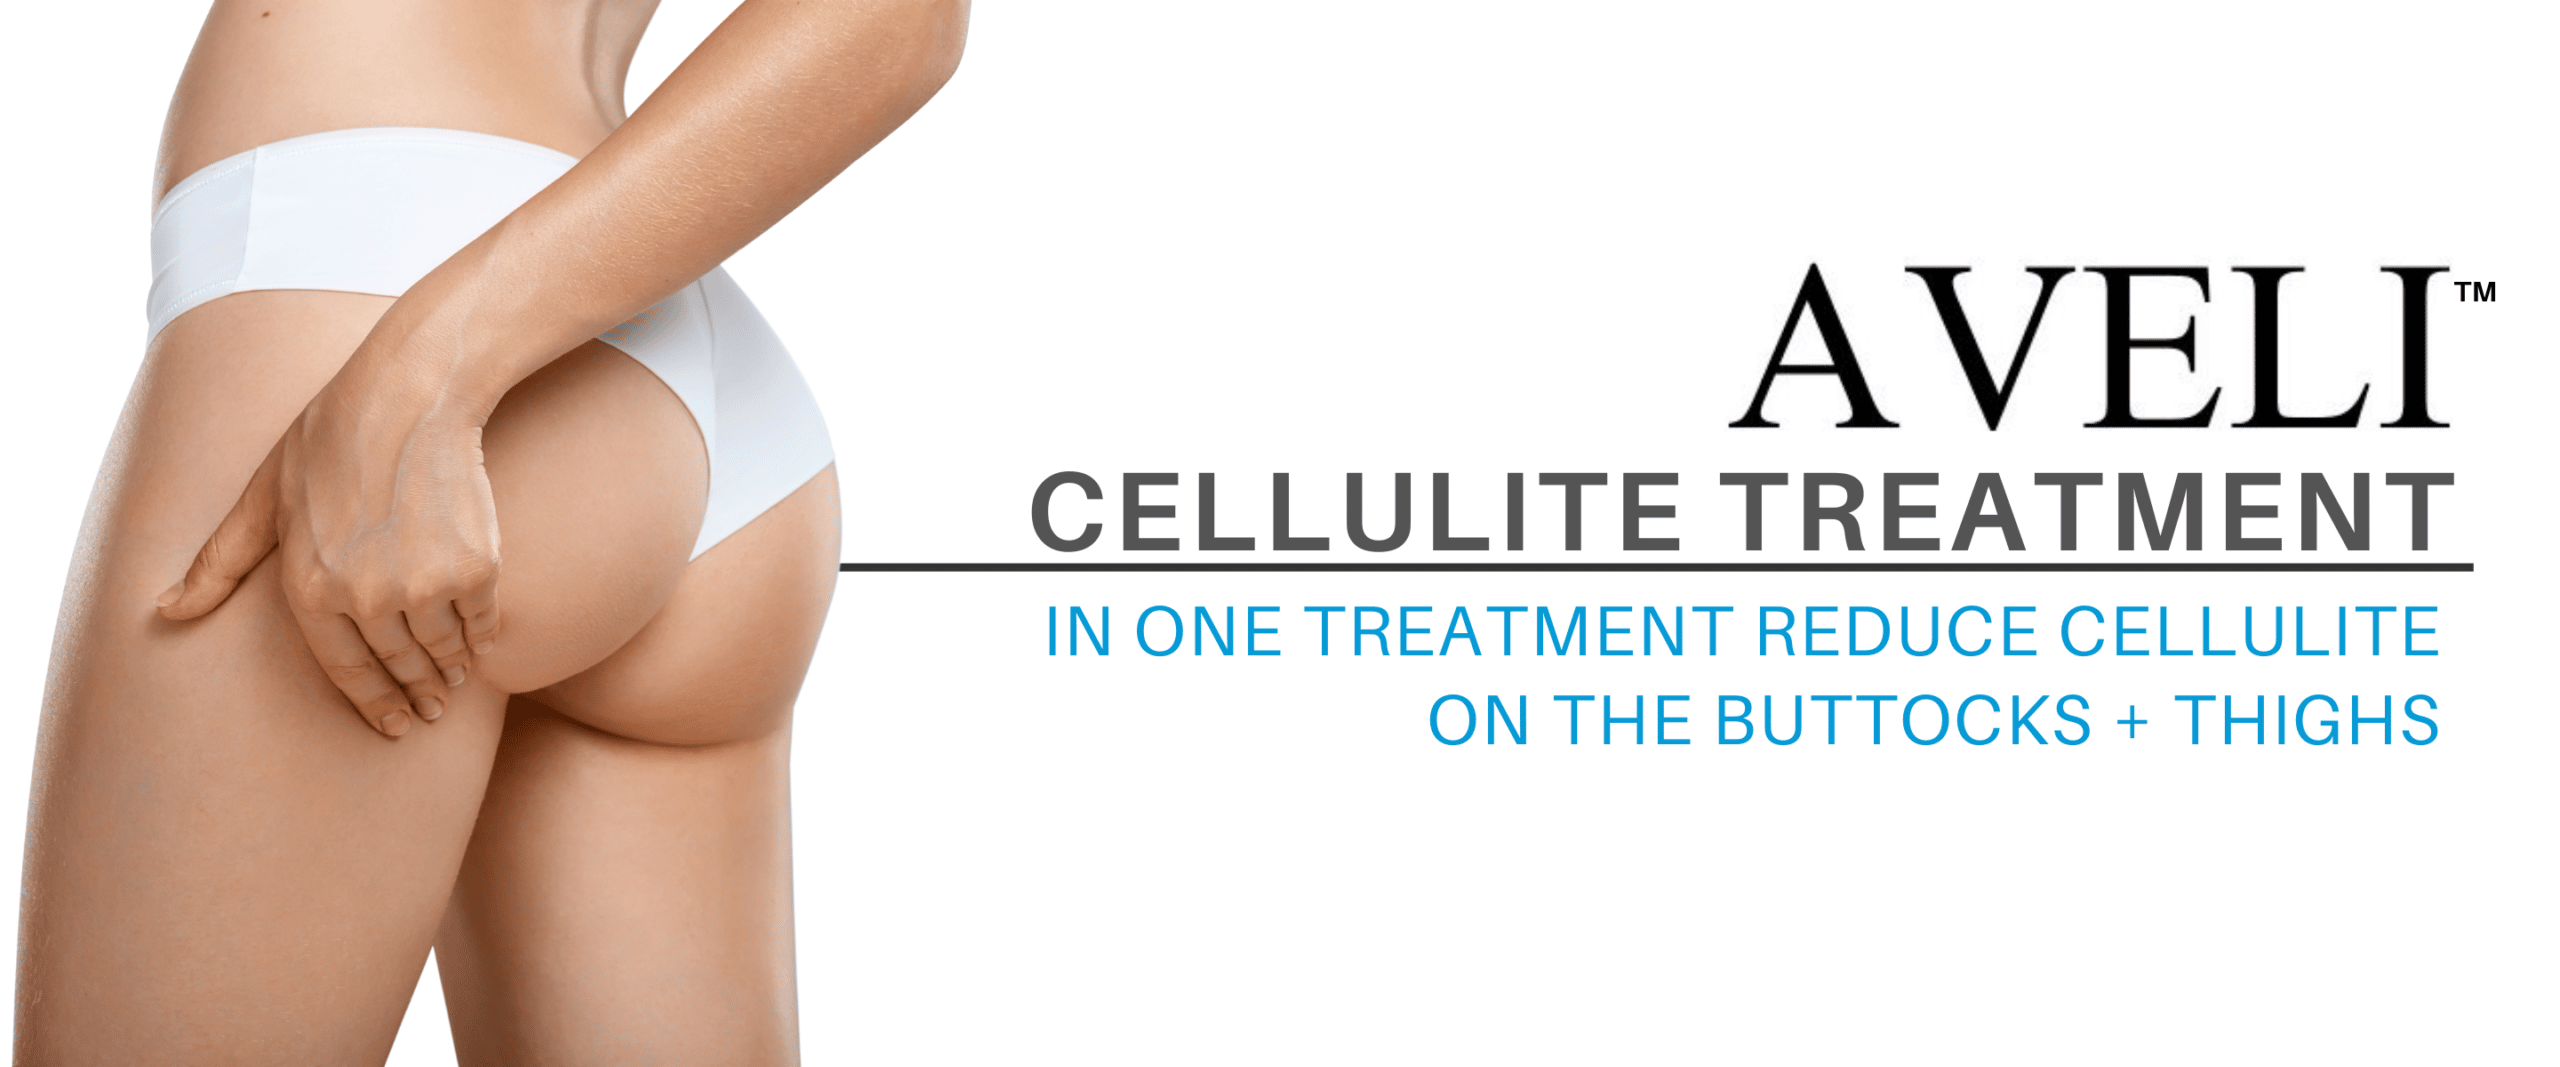 woman with beautiful buttocks and thighs with Avéli treatment